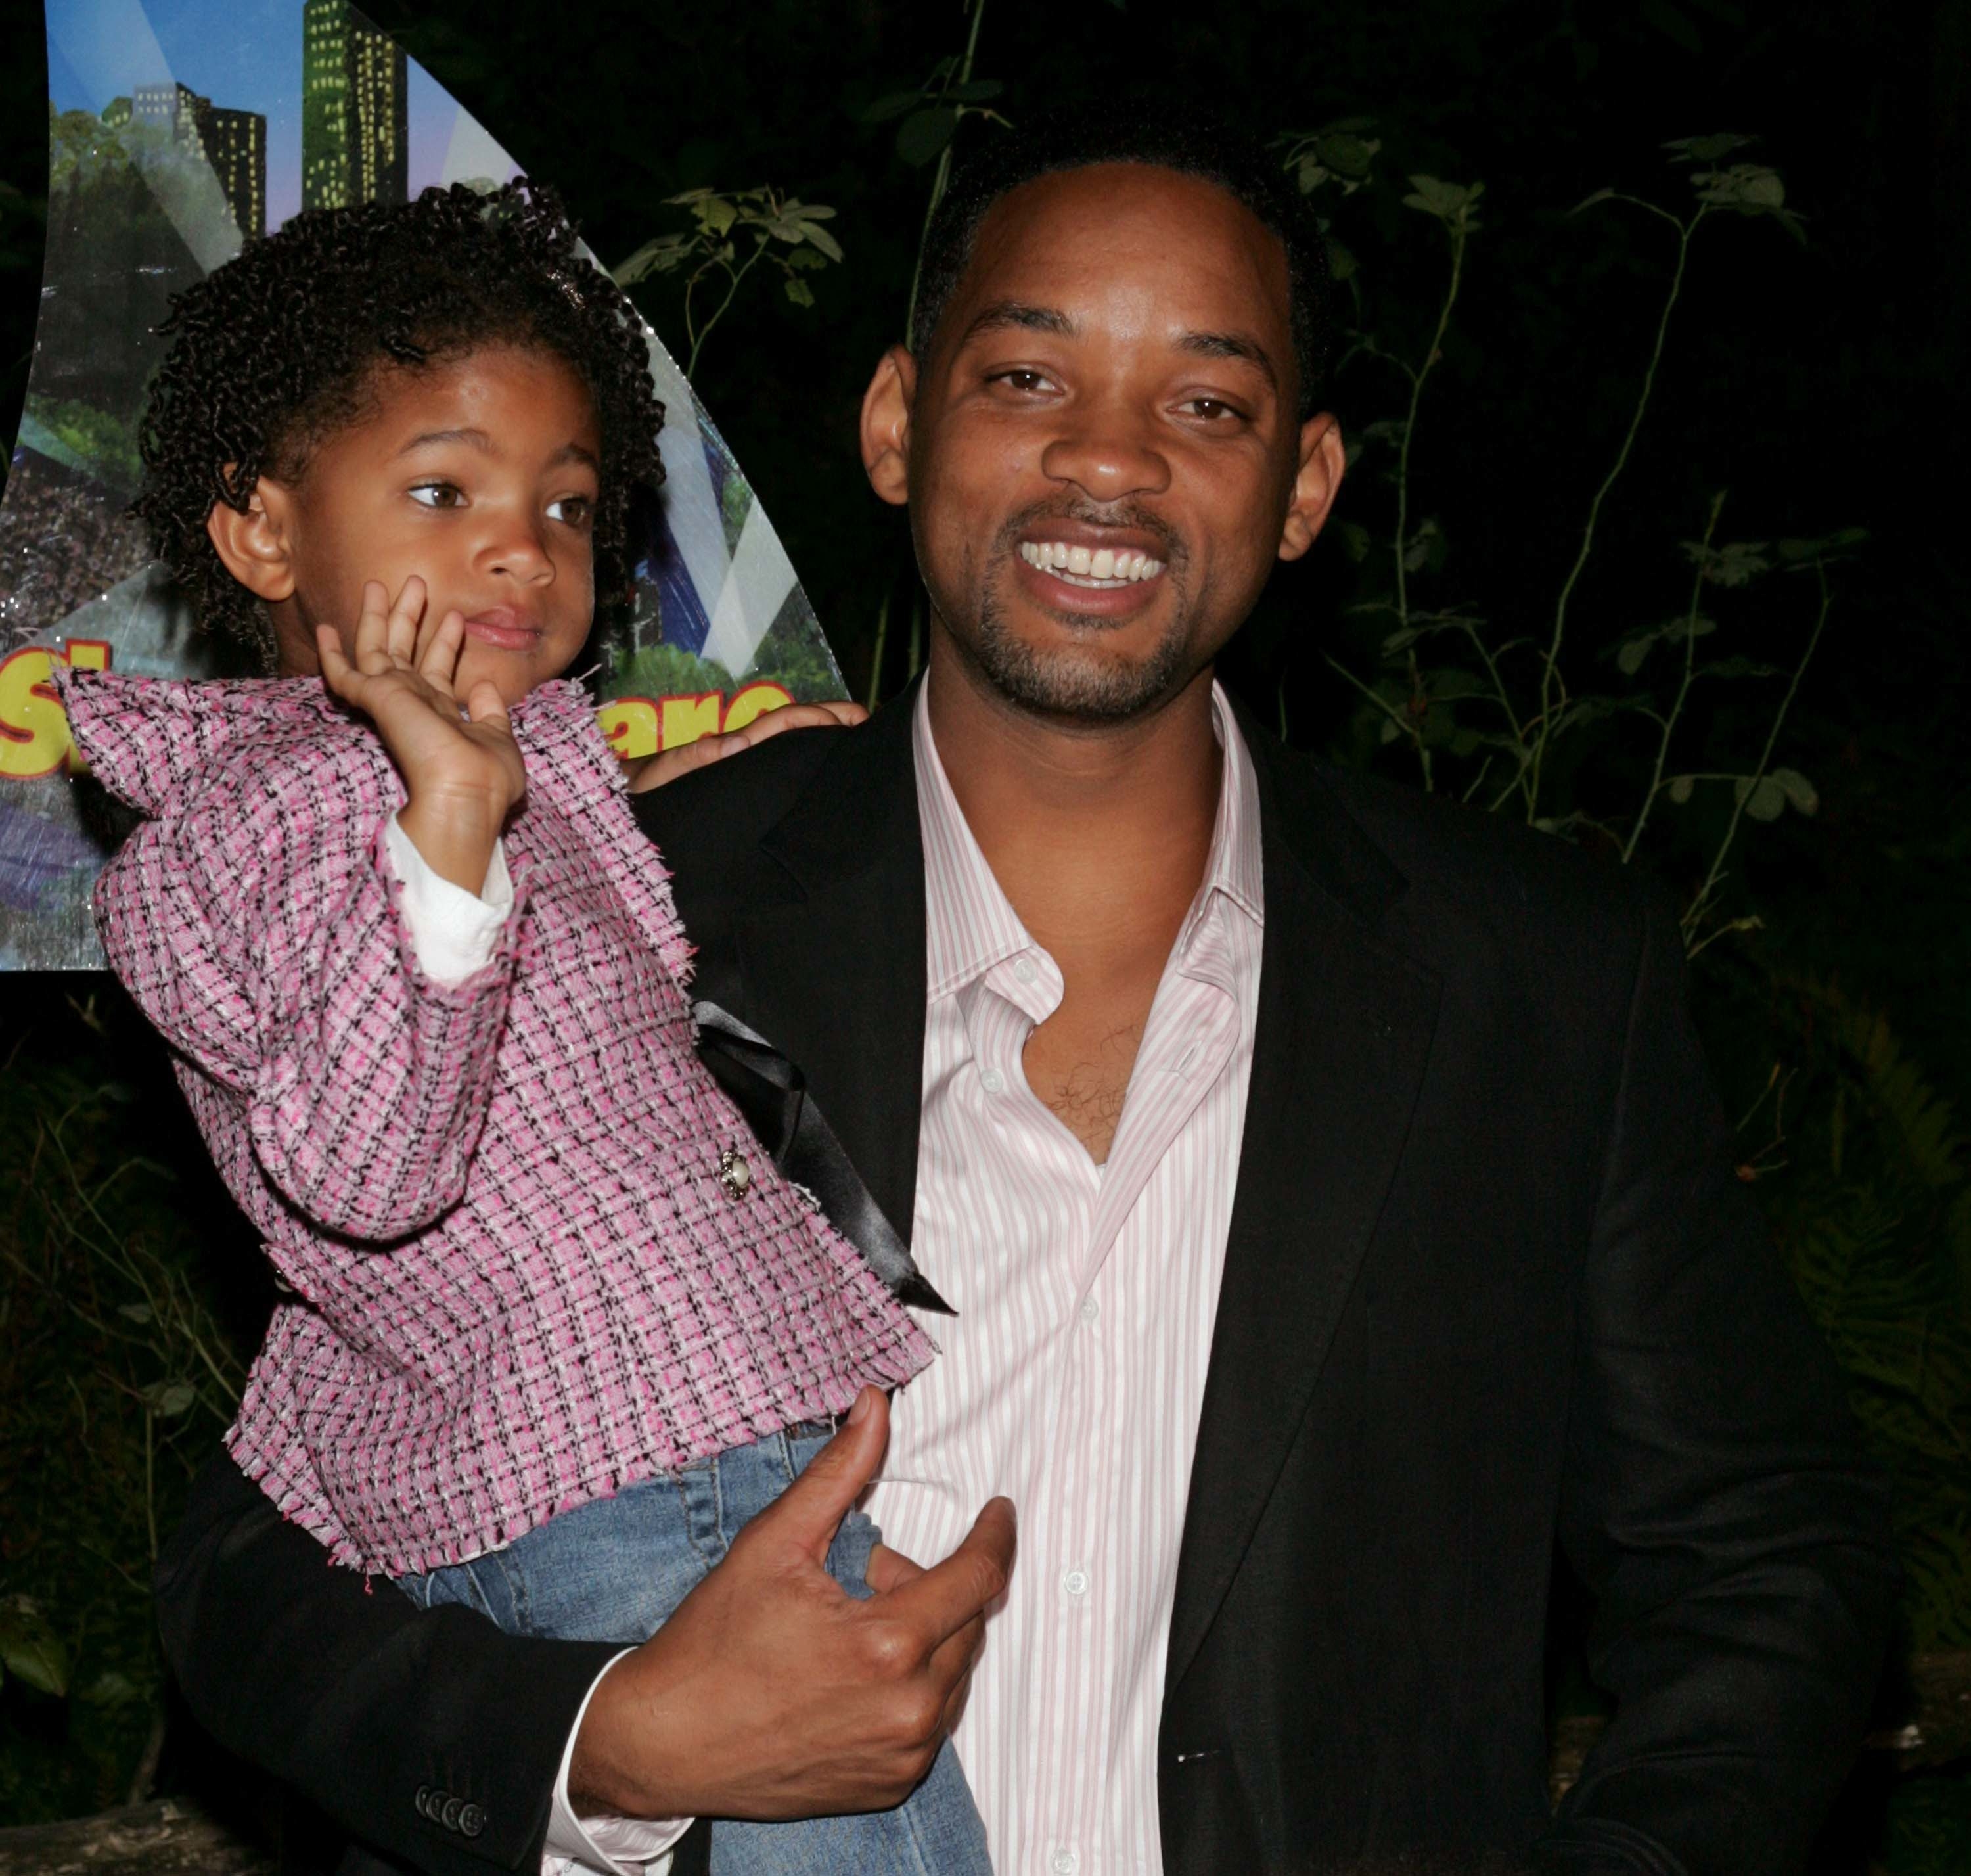 Will Smith holding daughter Willow in 2004 as she waves